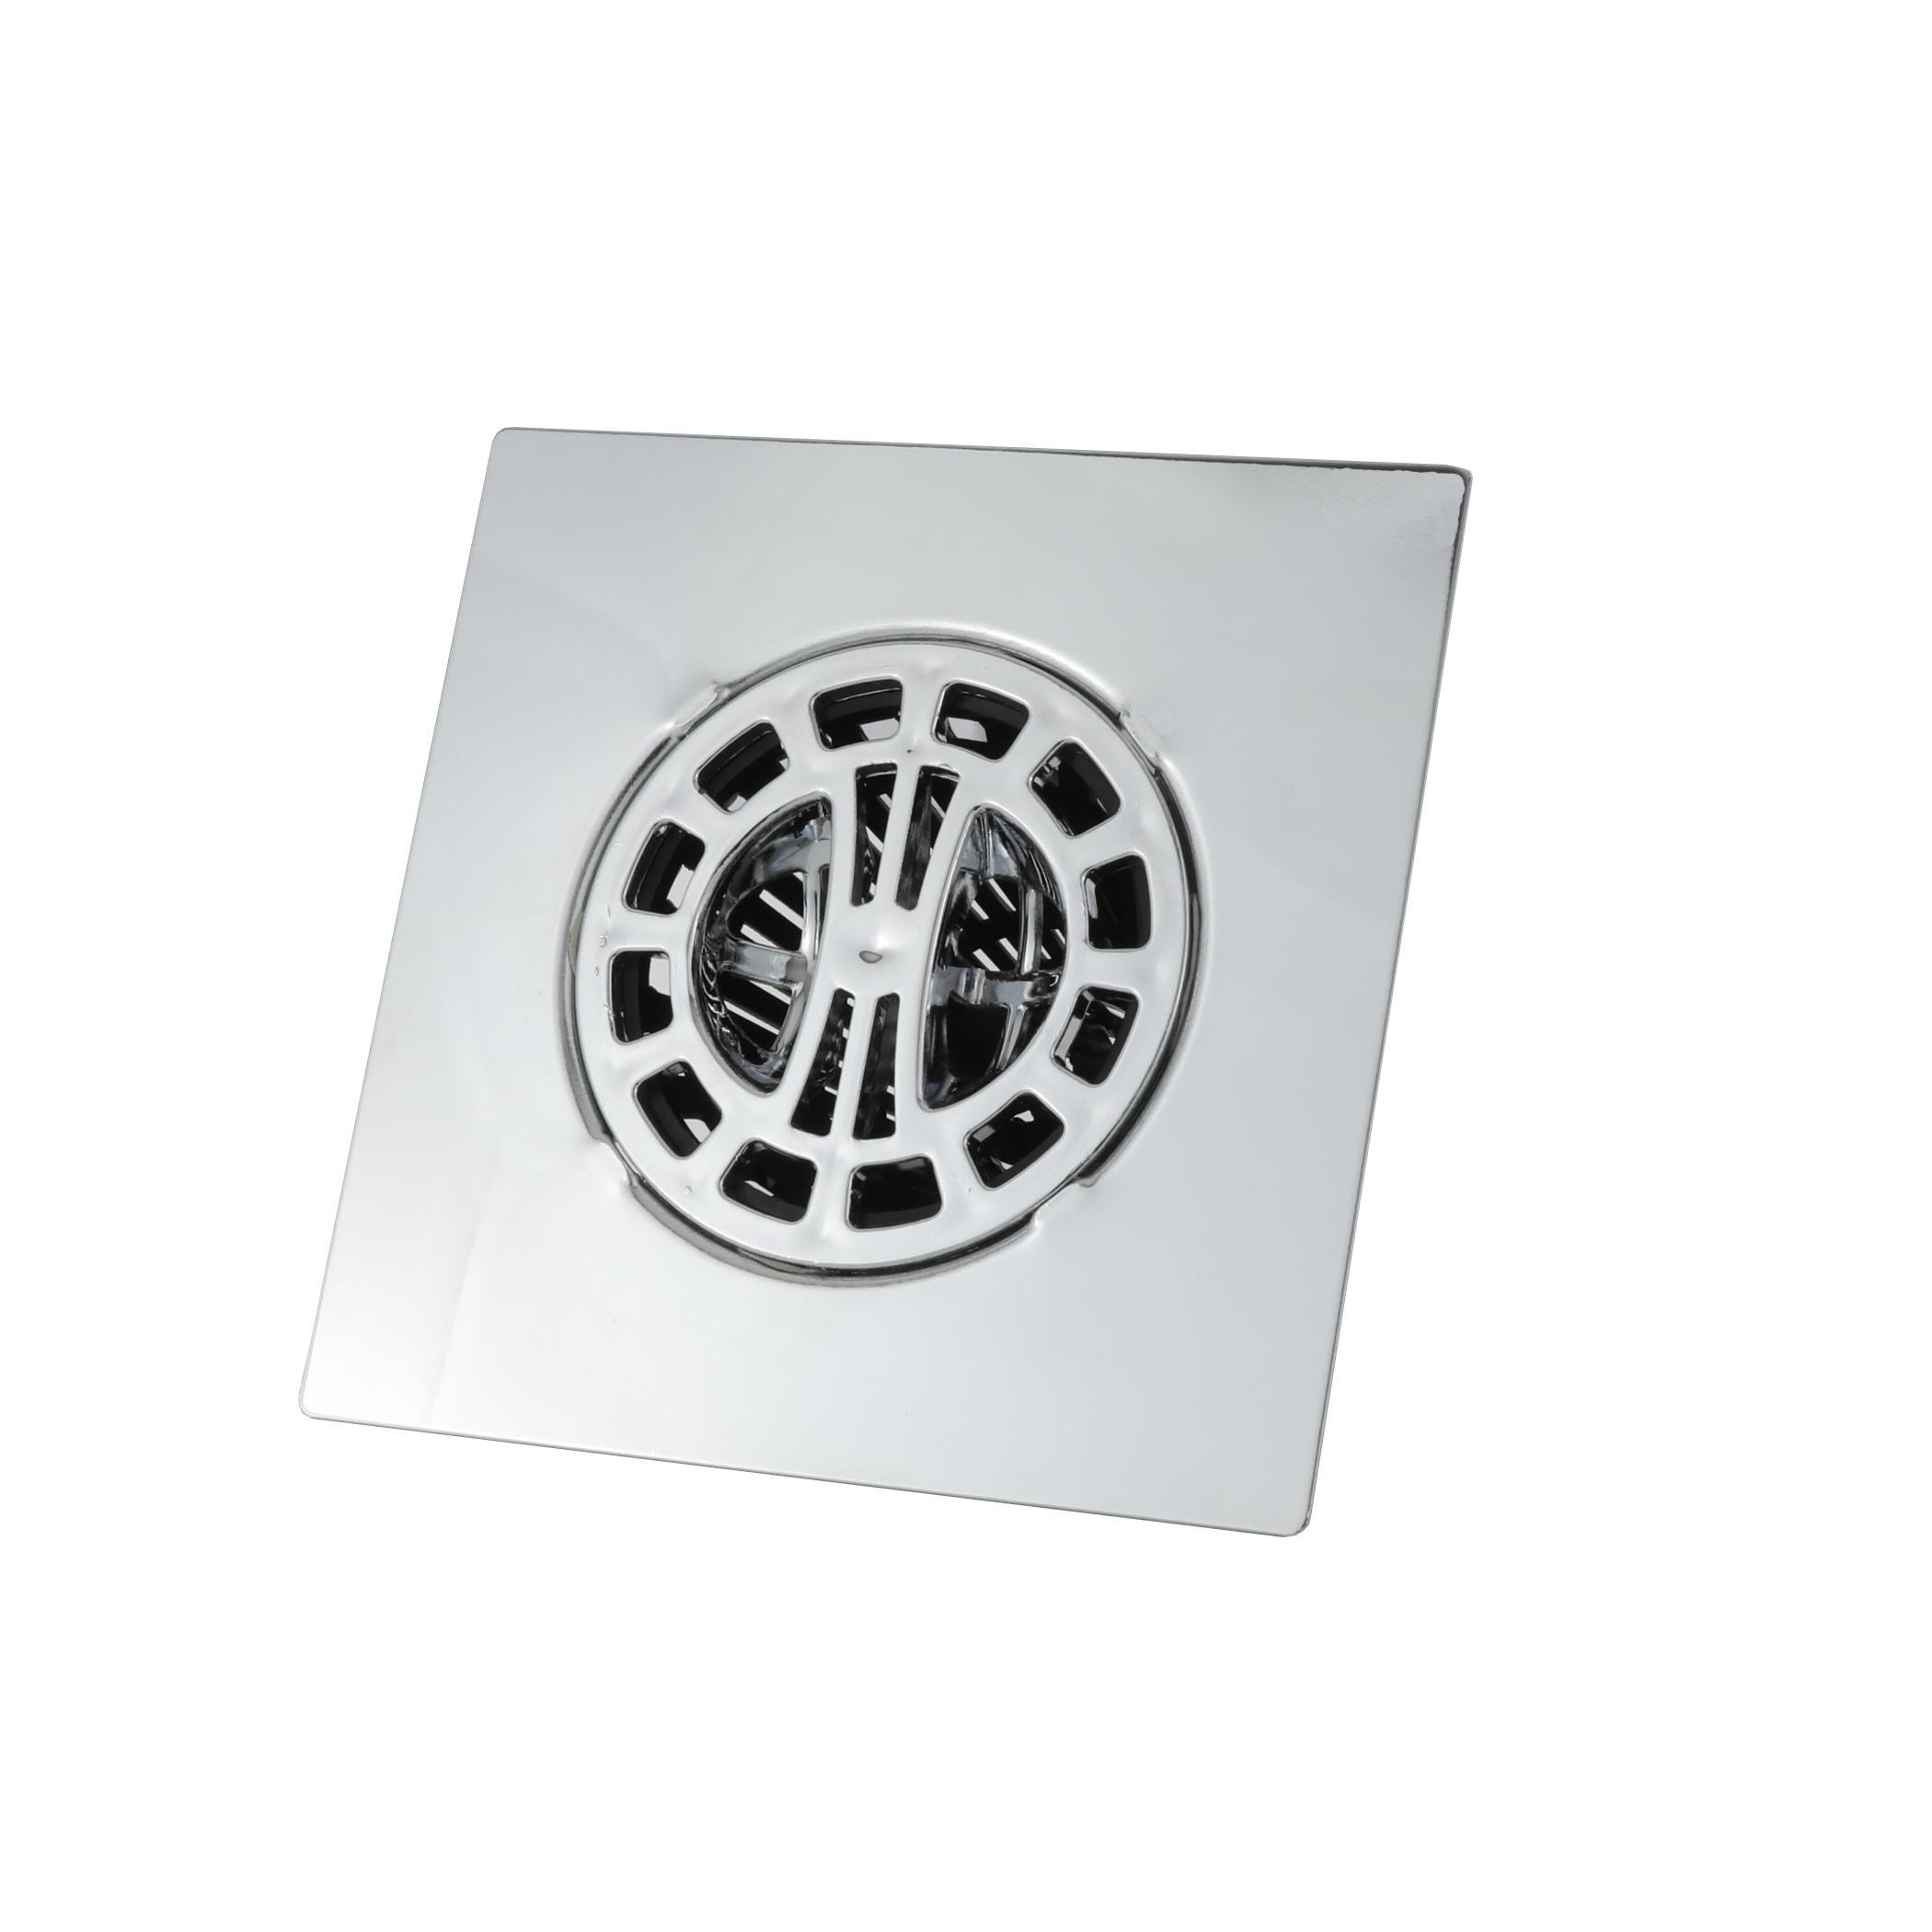 Danco 10529 Chrome Hair Catcher Shower Drain Cover, For Standard 3-Inch  Stand-Alone Shower Enclosures at Sutherlands